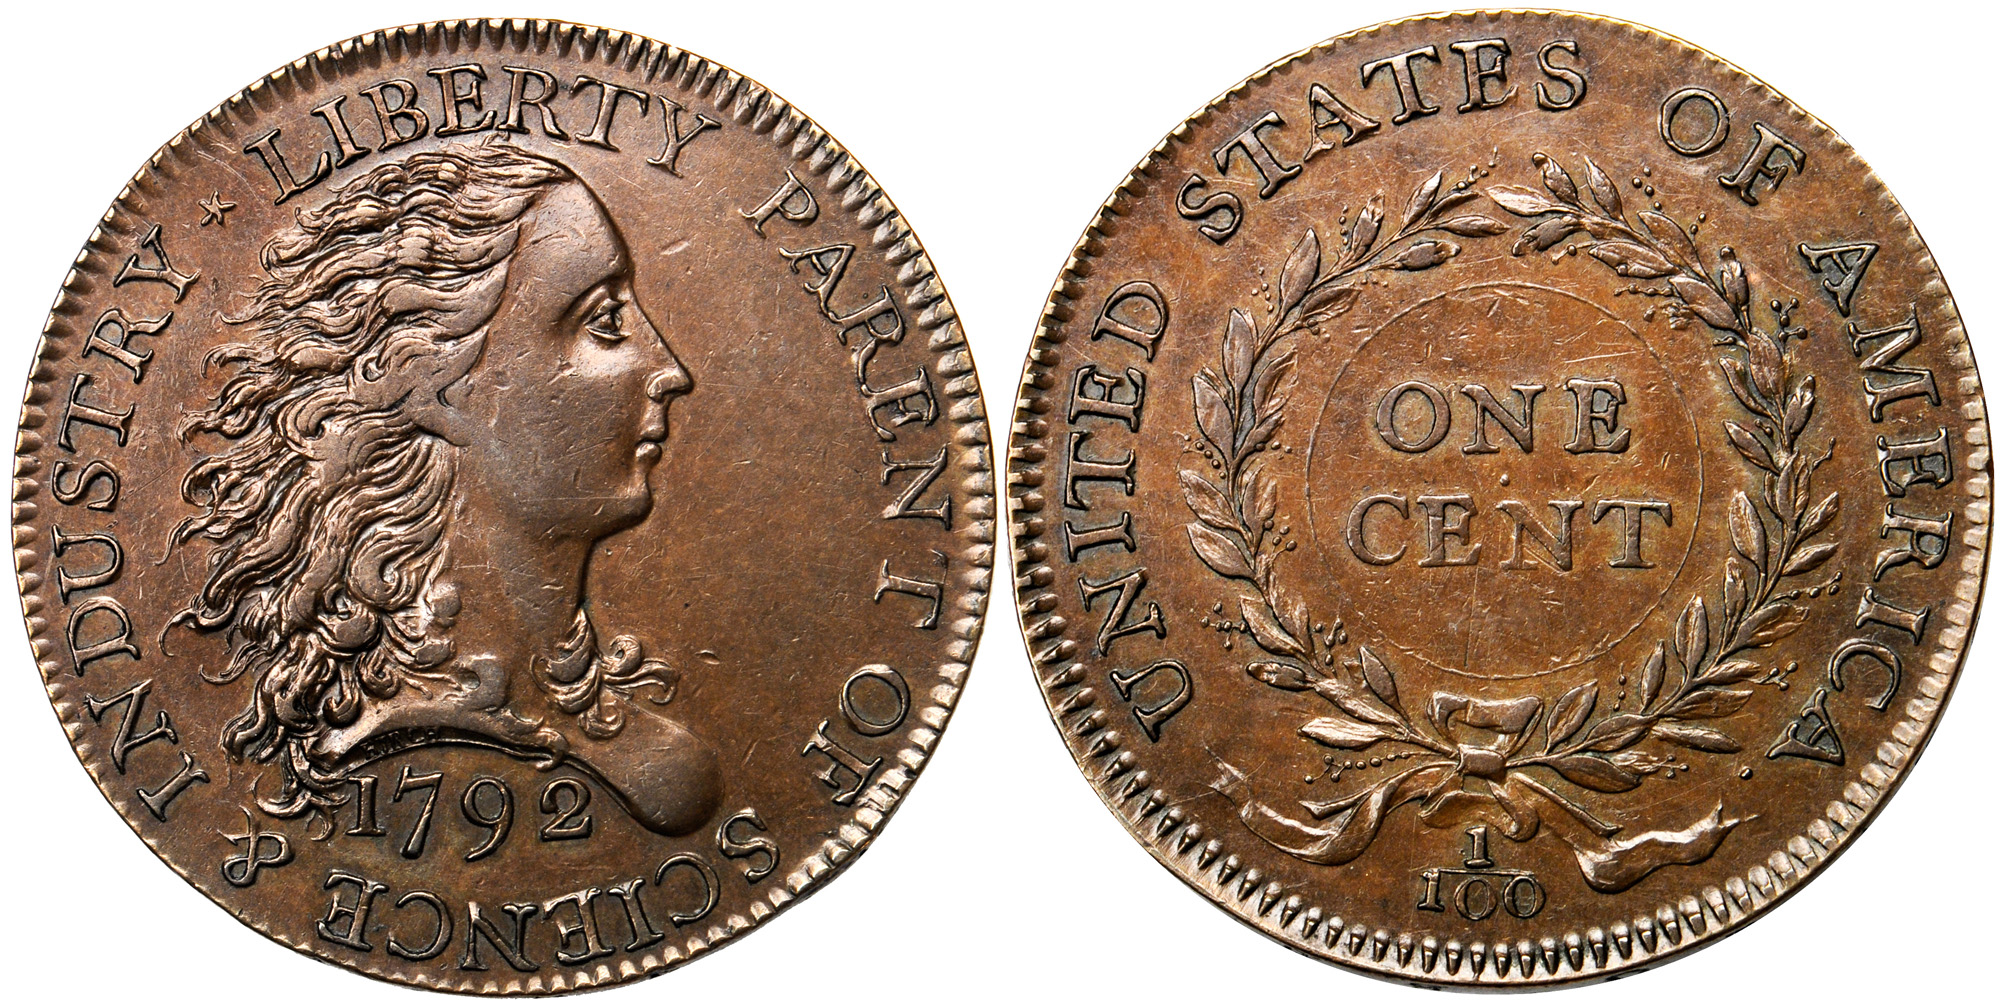 1792 Birch Penny, one of seven known to exist, auctioned by Stack's Bowers Galleries for $1.175 million. Image courtesy of Stack's Bowers